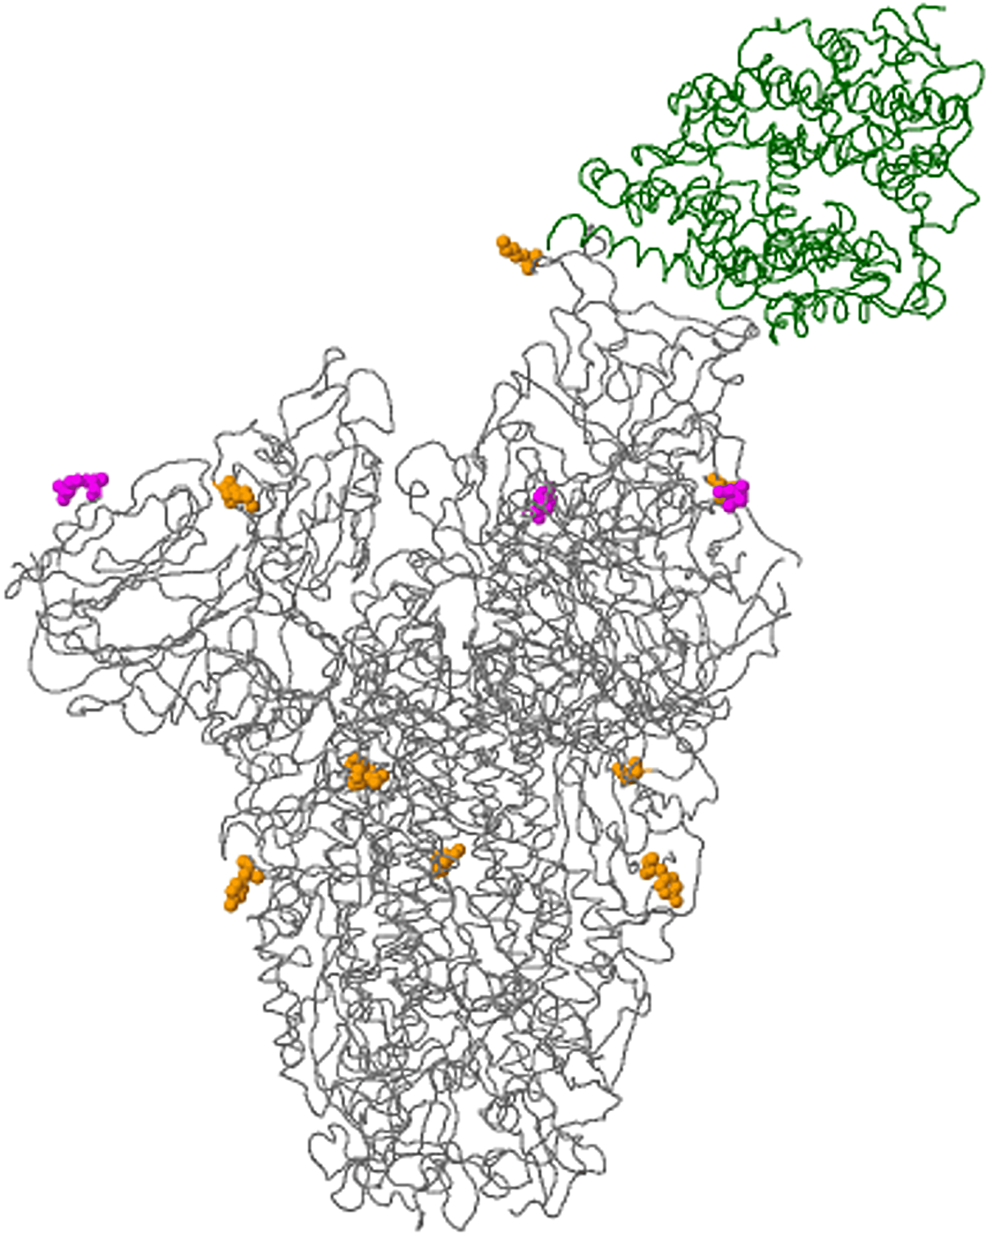 Representative-3D-modelling-of-the-Spike-glycoprotein-in-interaction-of-human-angiotensin-converting-enzyme-2-(ACE-2)-receptor-showing-key-amino-acid-substitutions-in-breakthrough-case-number-EPI_ISL_2373554.